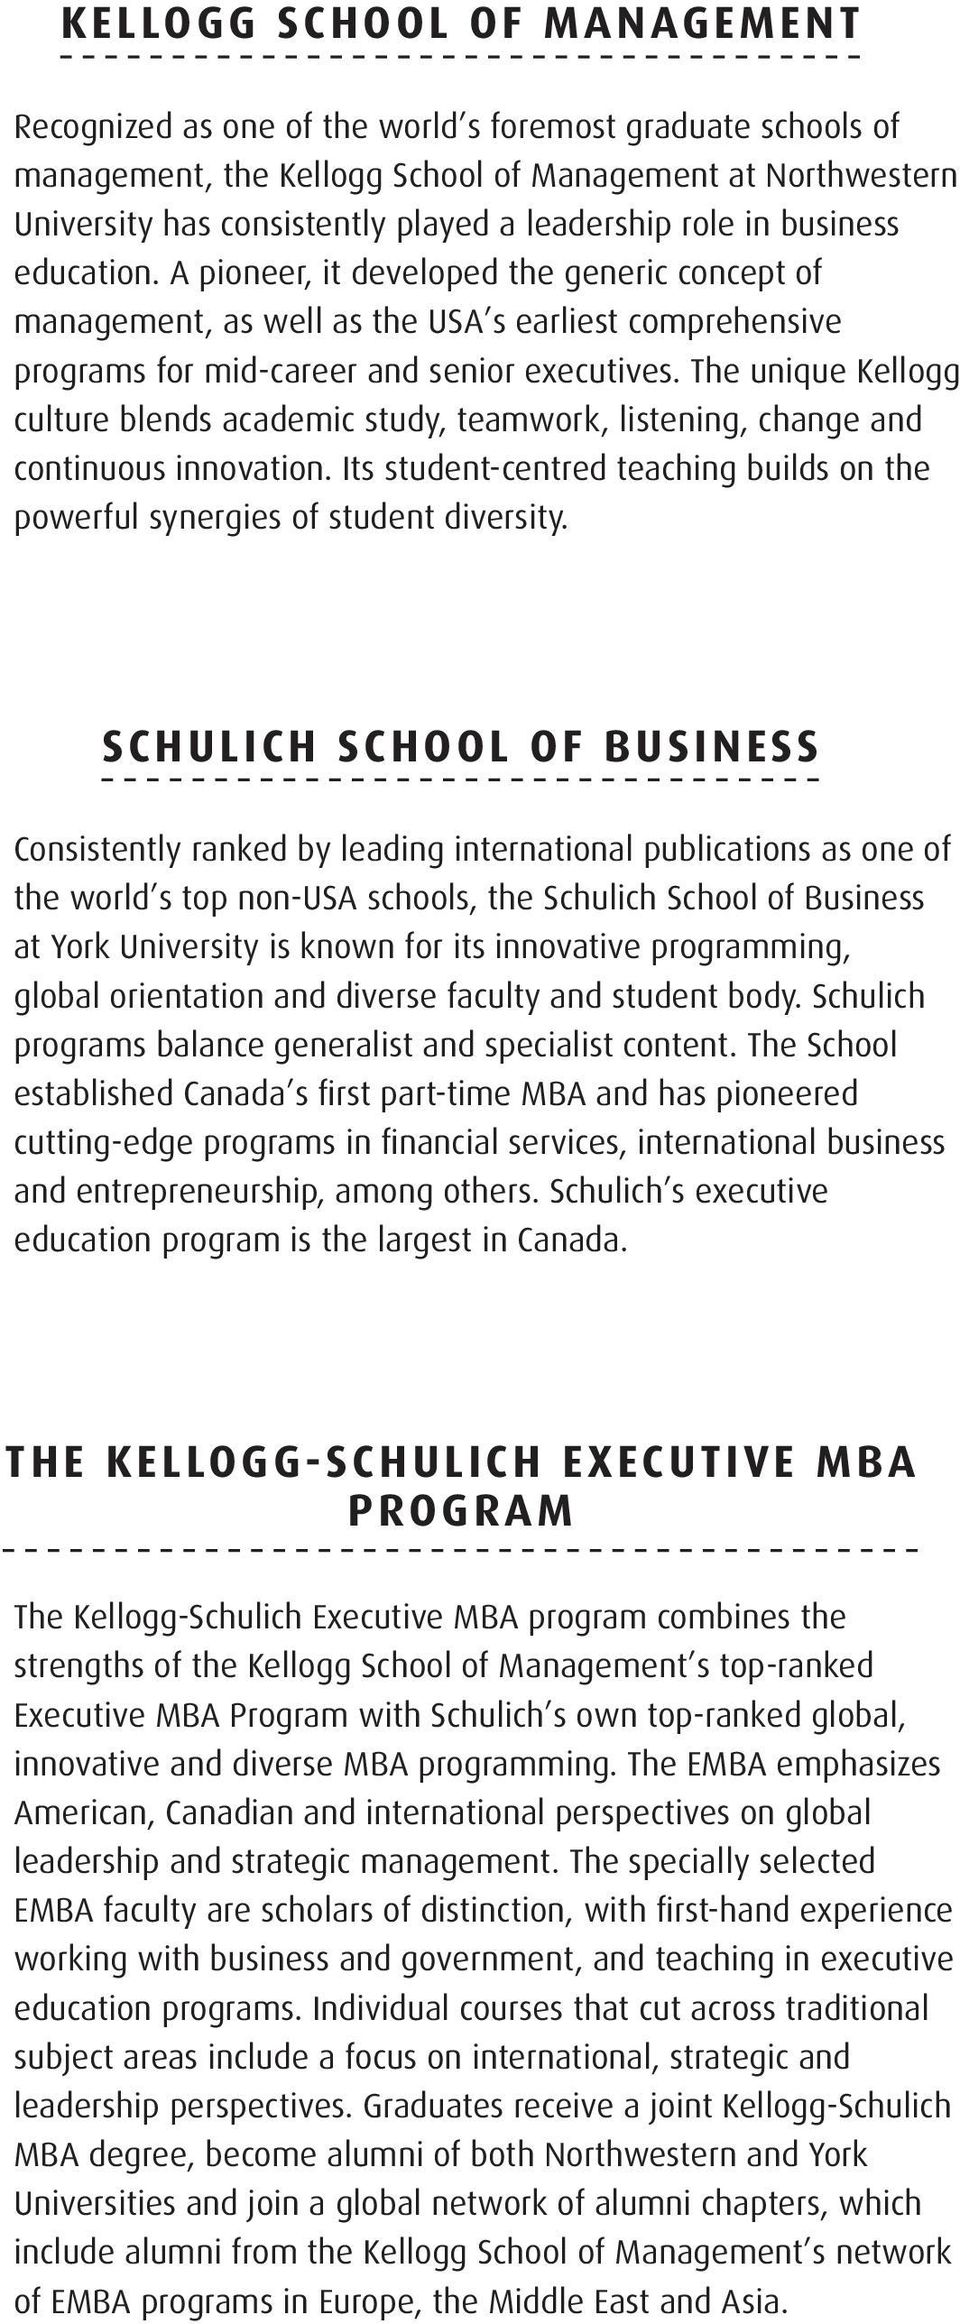 The unique Kellogg culture blends academic study, teamwork, listening, change and continuous innovation. Its student-centred teaching builds on the powerful synergies of student diversity.